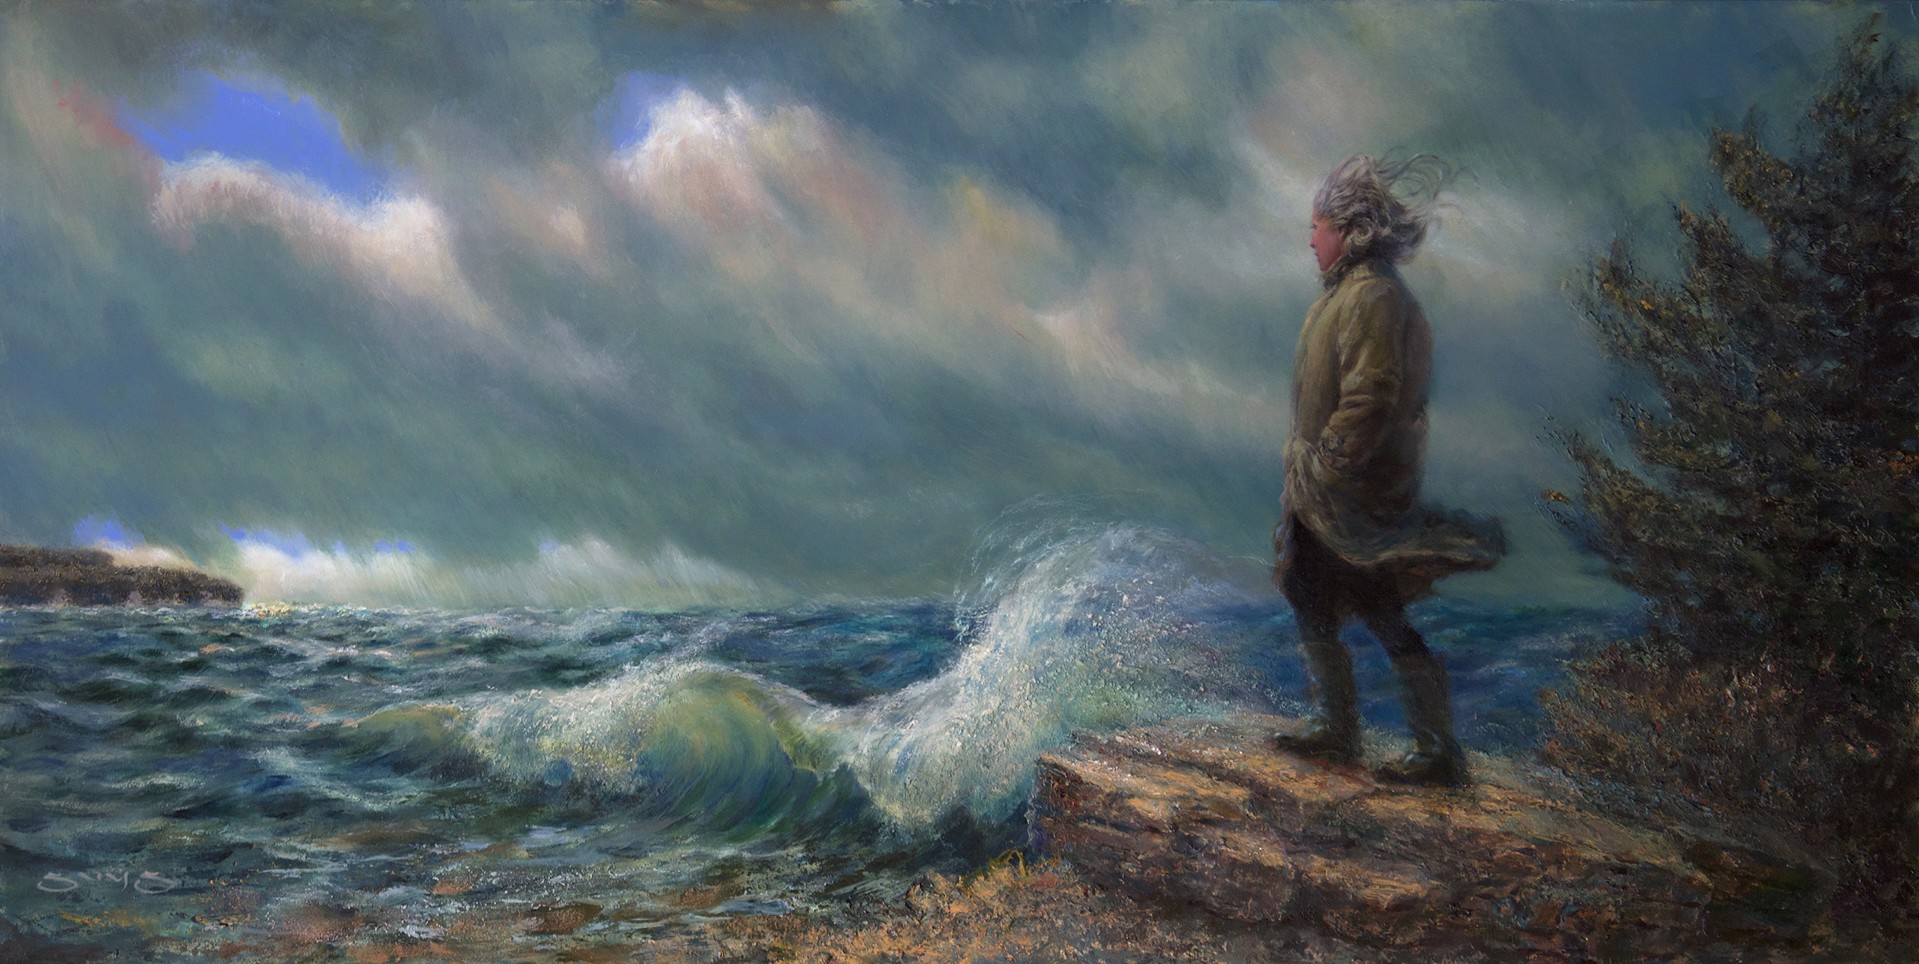 William A. Suys Jr., OPAM "The Breaking Storm" by Oil Painters of America